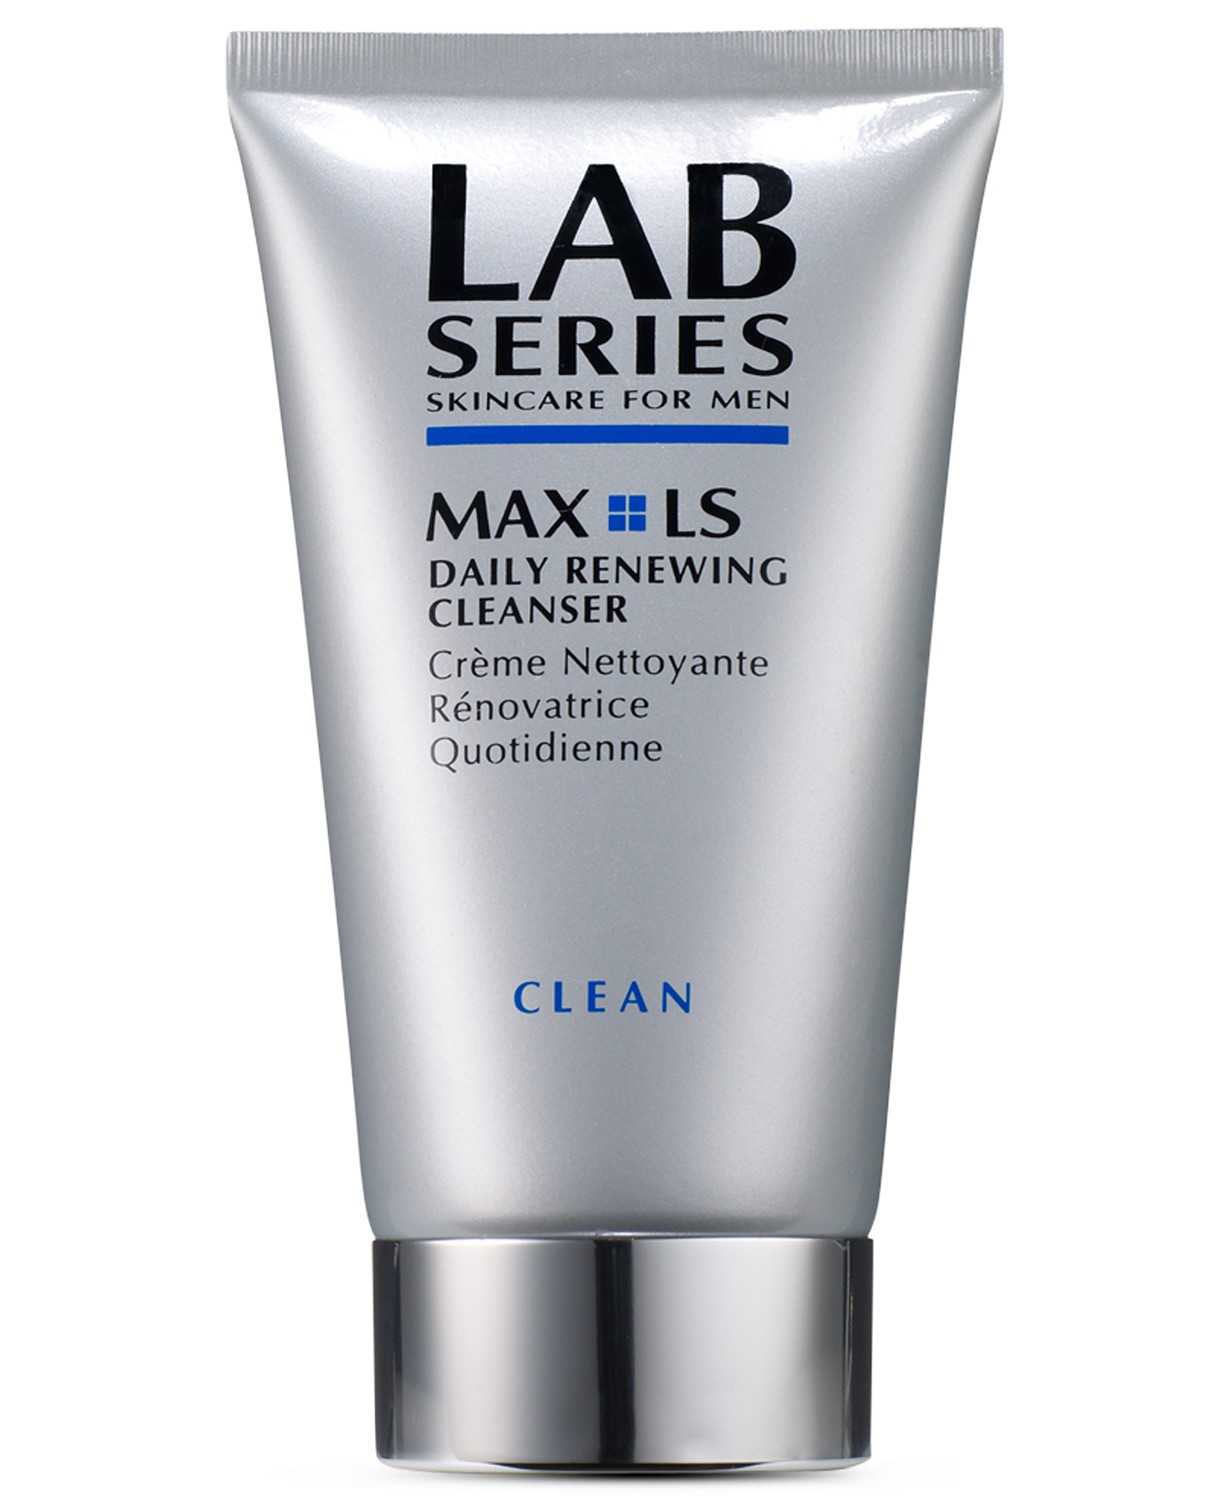 LAB SERIES MAX LS DAILY RENEWING CLEANSER, 5 OZ.